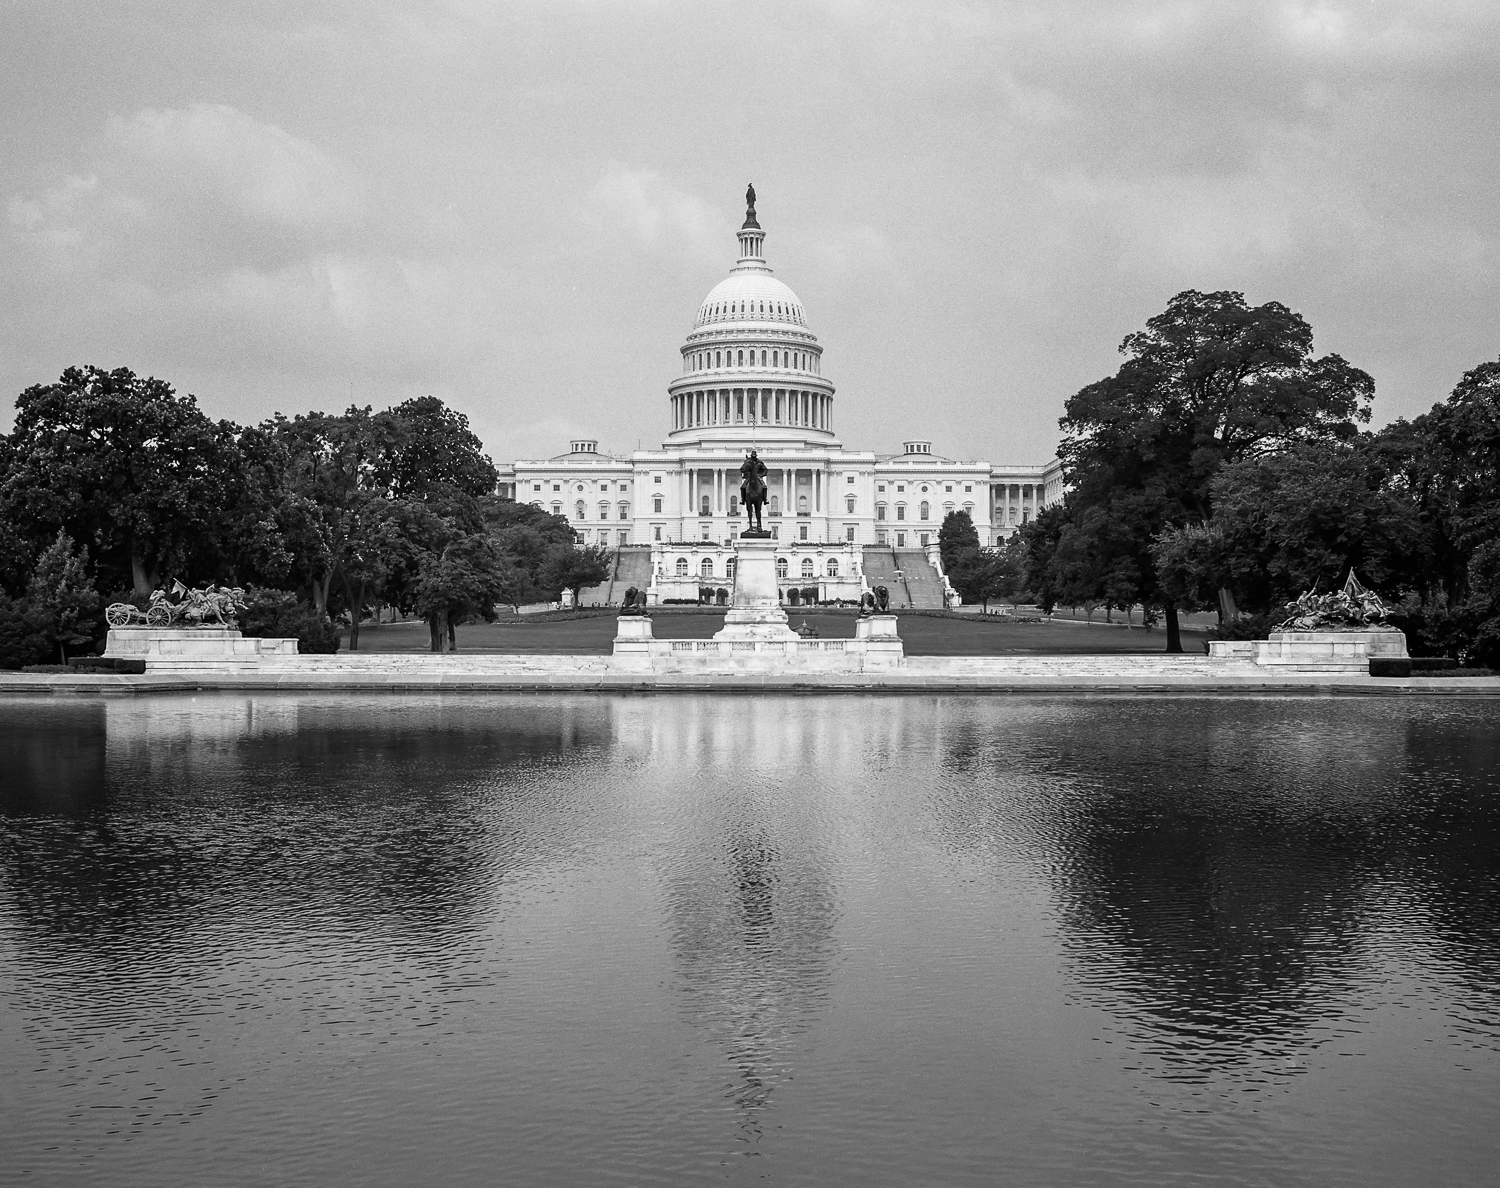 The United States Capitol Building